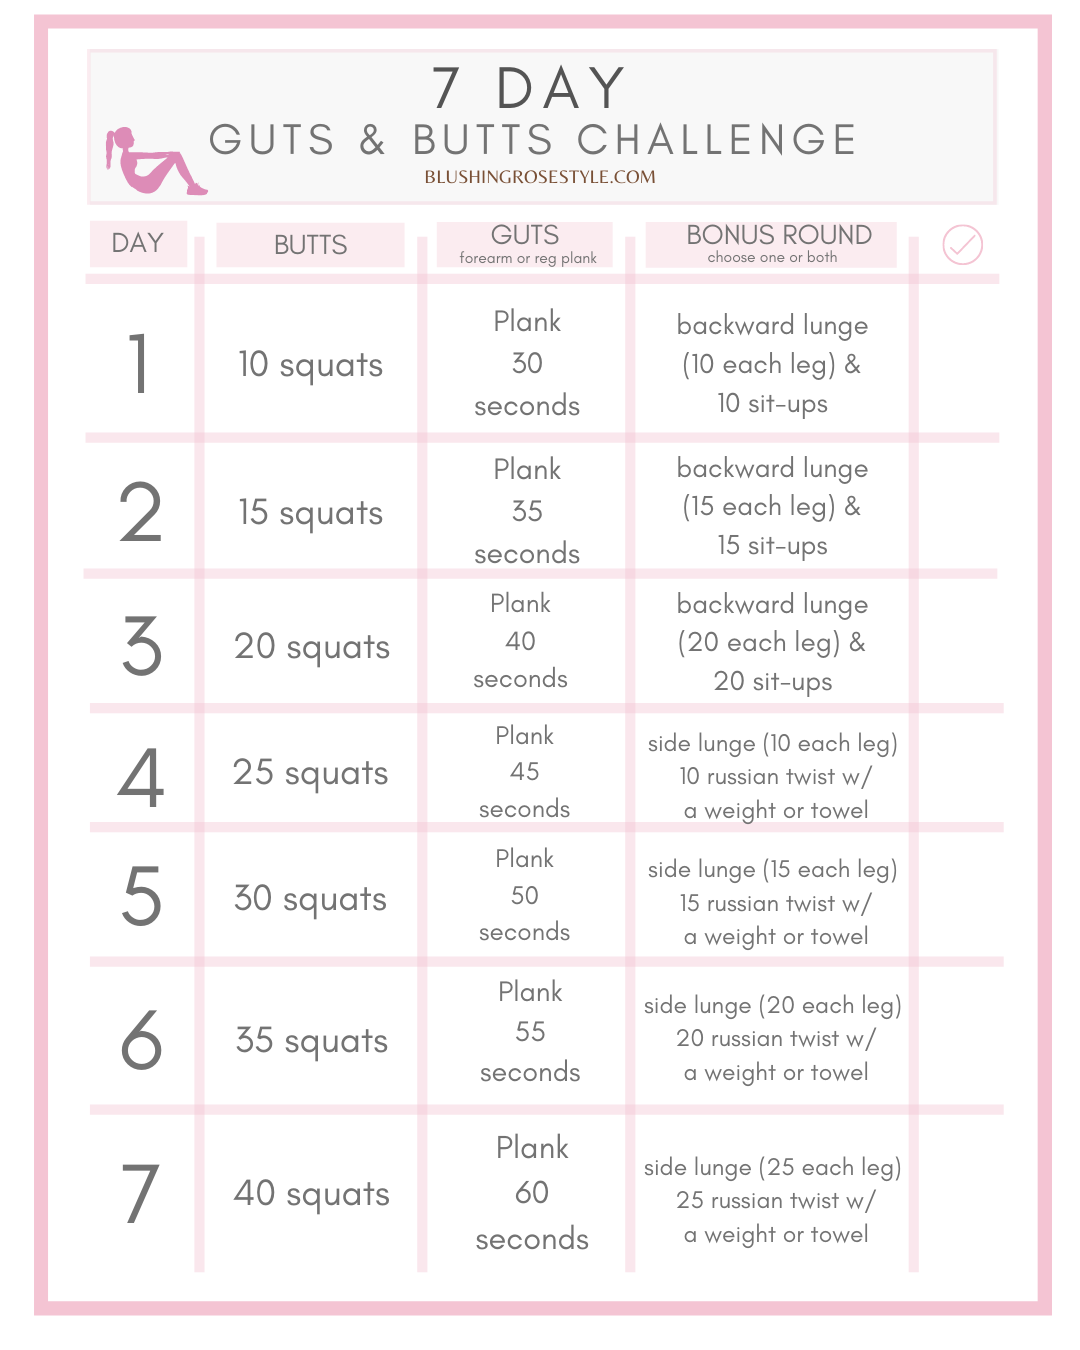 7 Day Guts & Butts Challenge – January Edition